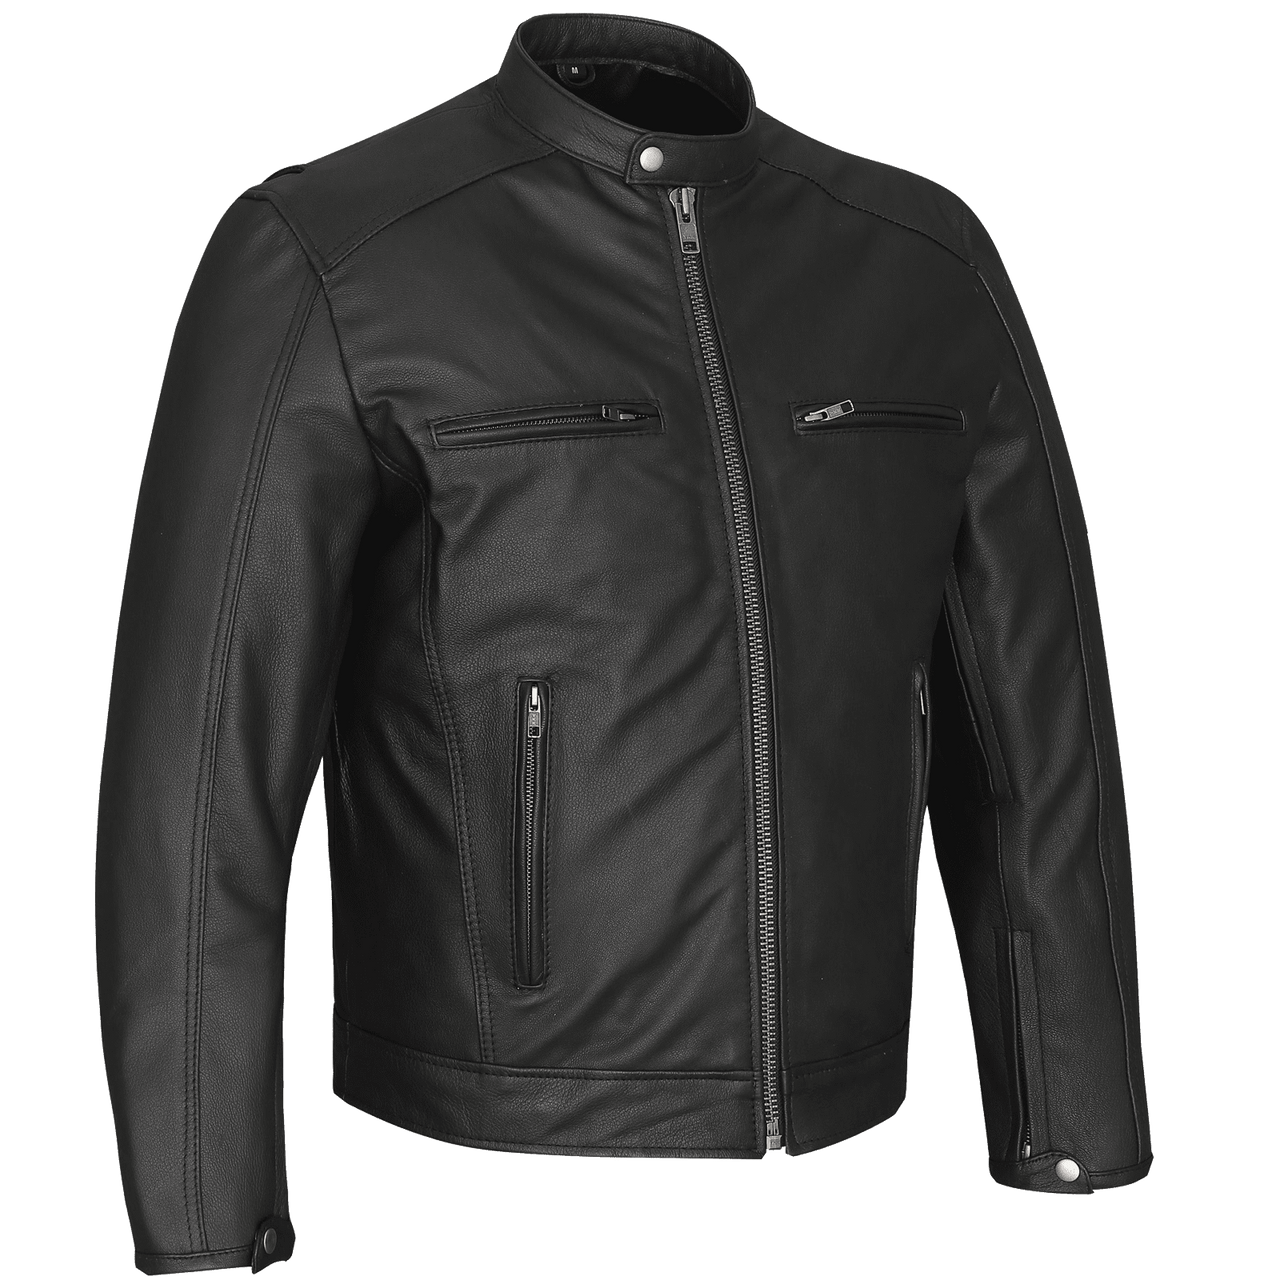 Leather jacket Scoop Black size 00 US in Leather - 25428340